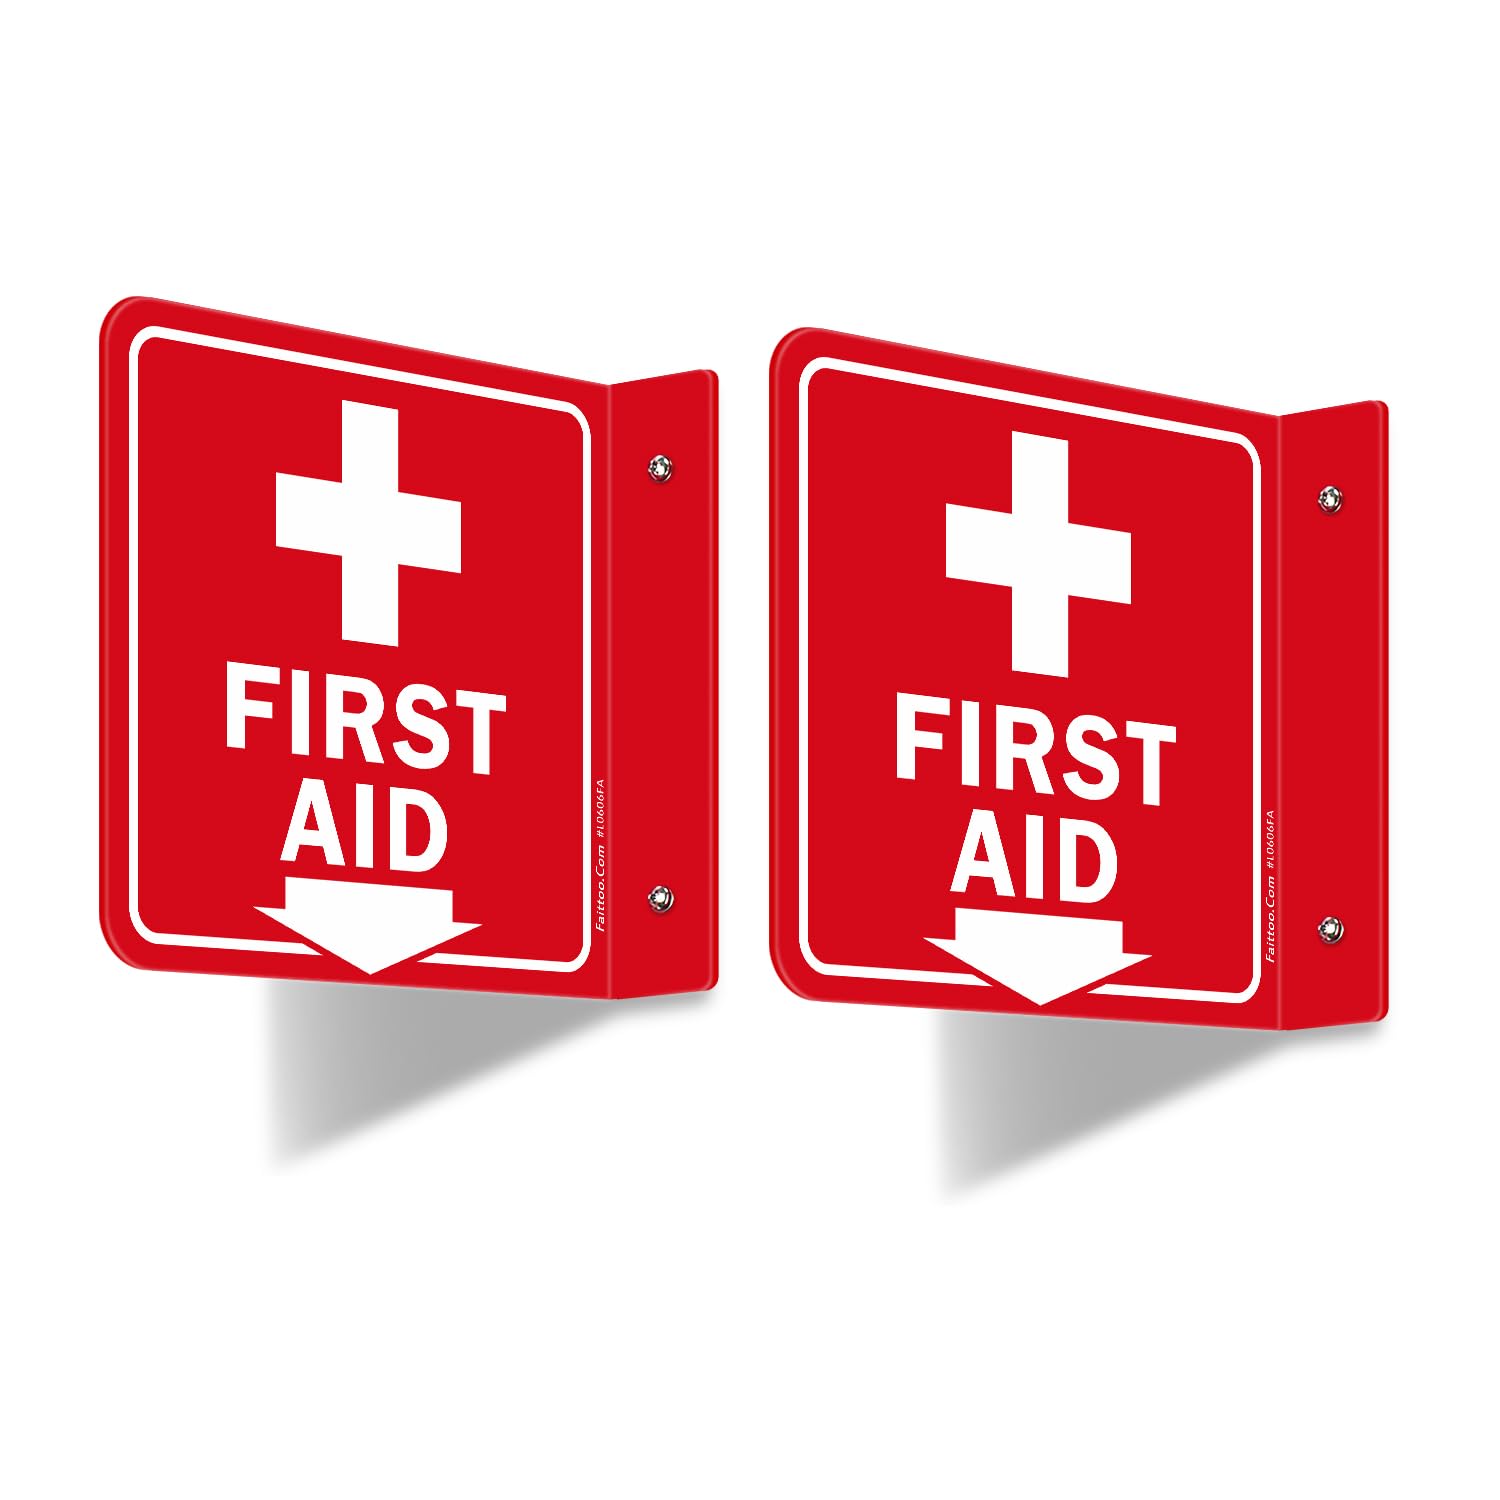 Faittoo First Aid Sign, 2 Pack First Aid with Cross Symbol - 6 x 6 Inches Acrylic Plastic, 2 Pre-Drilled Holes, Includes Matching Screws, Use for Home Office/Business